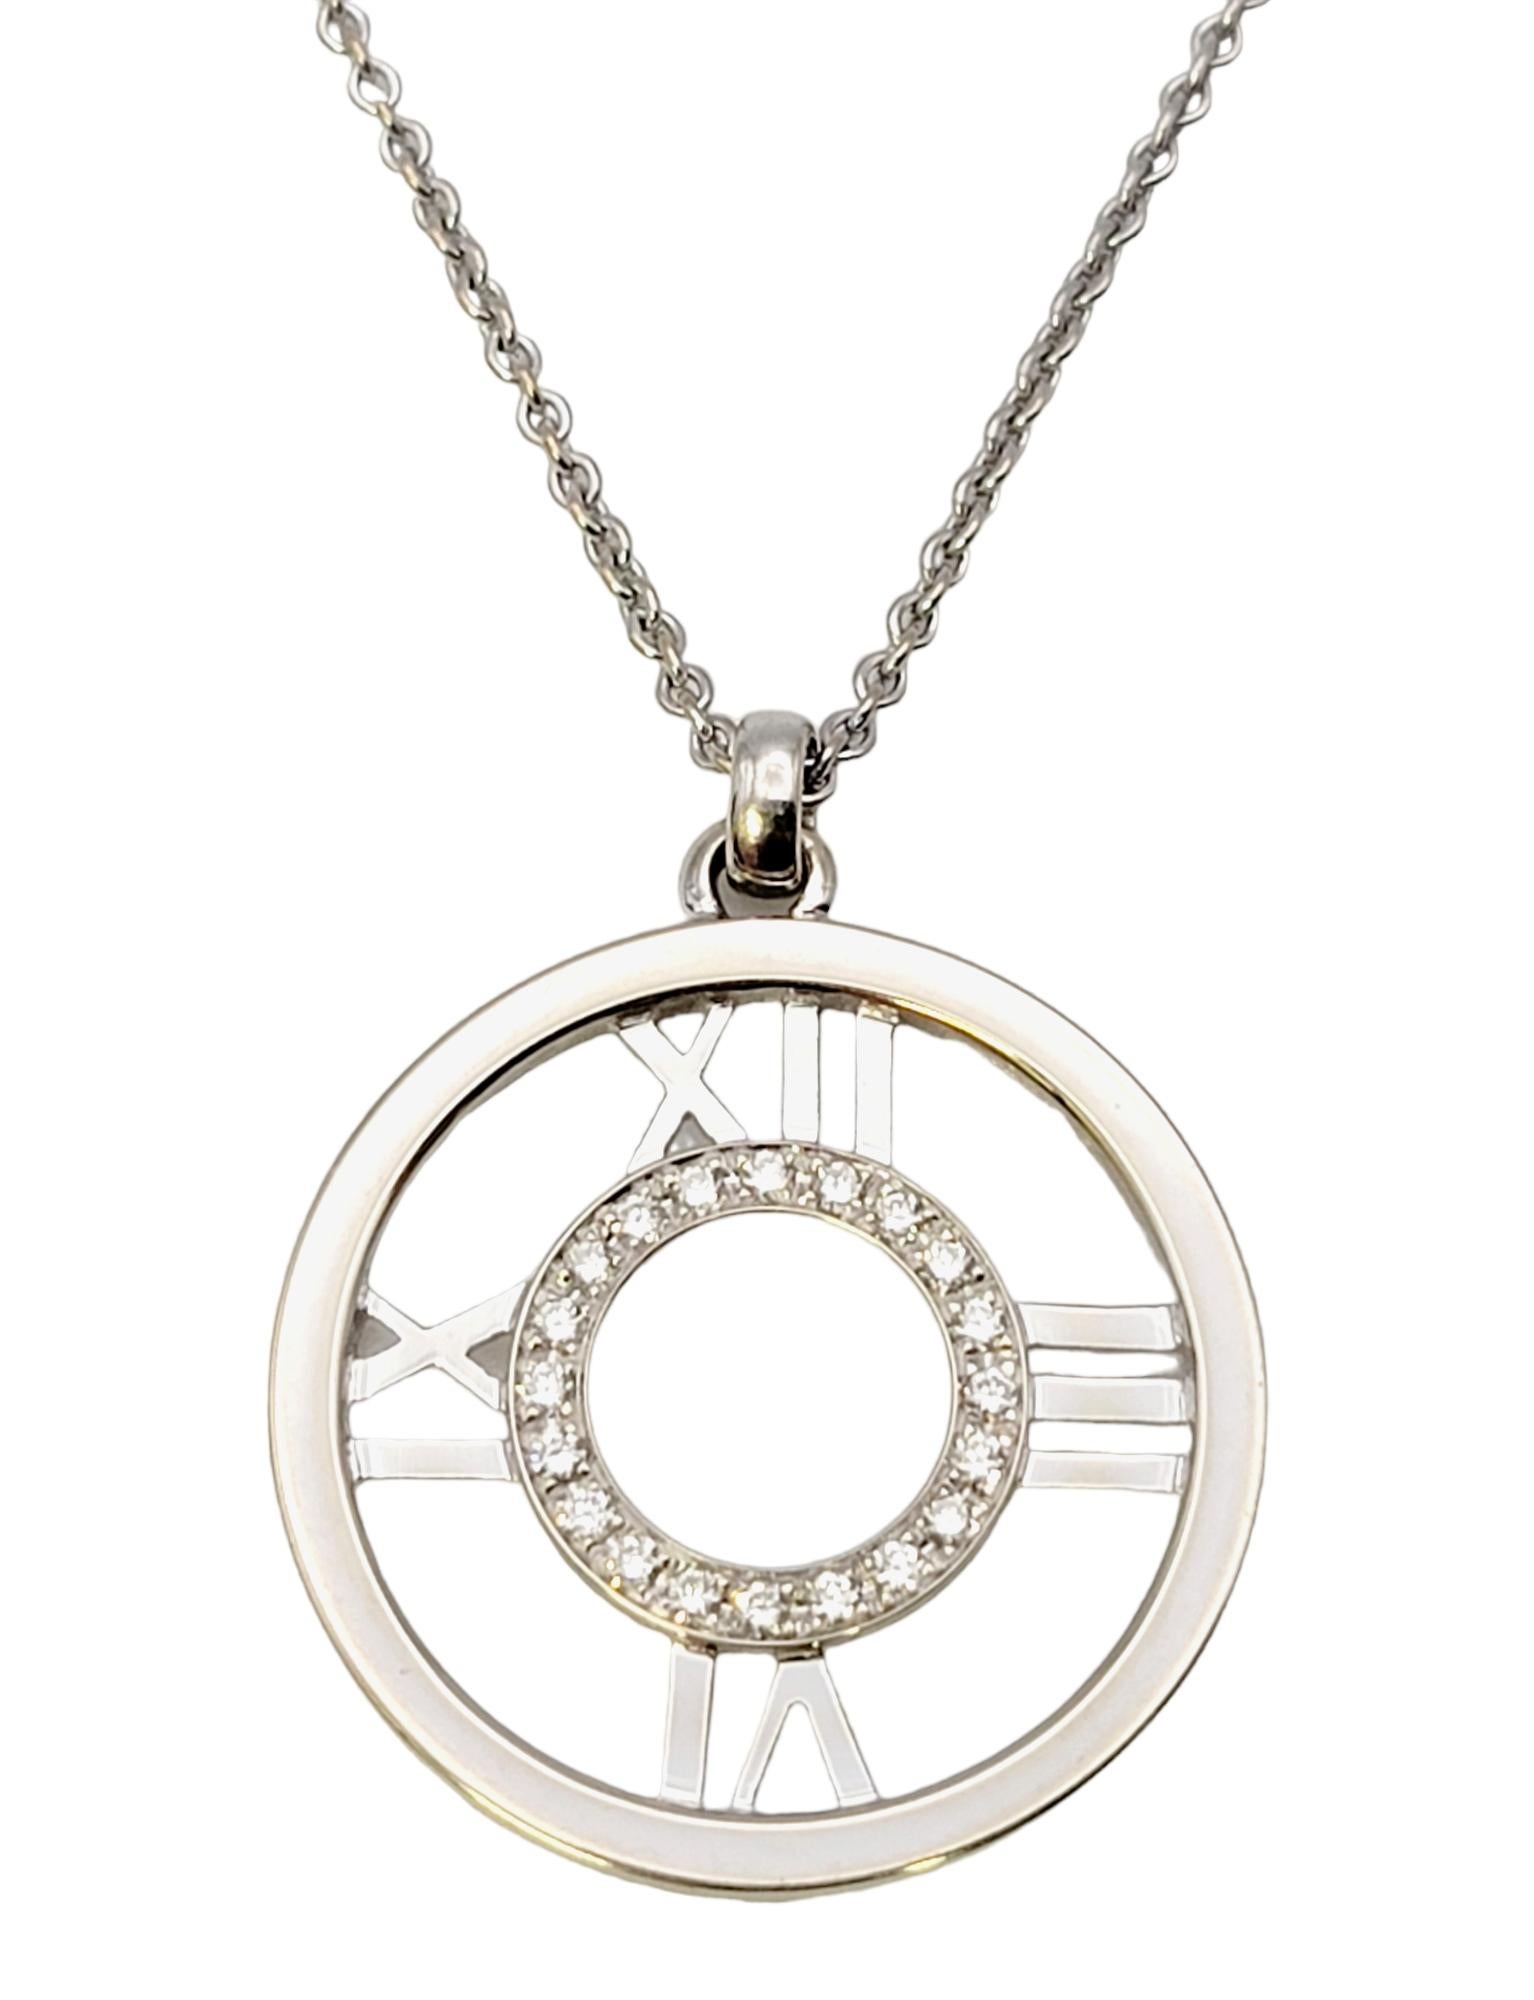 This classic designer pendant necklace from Tiffany & Co. is the perfect touch of luxury. Founded in 1837 in New York City, Tiffany & Co. is one of the world's most storied luxury design houses recognized globally for its innovative jewelry design,